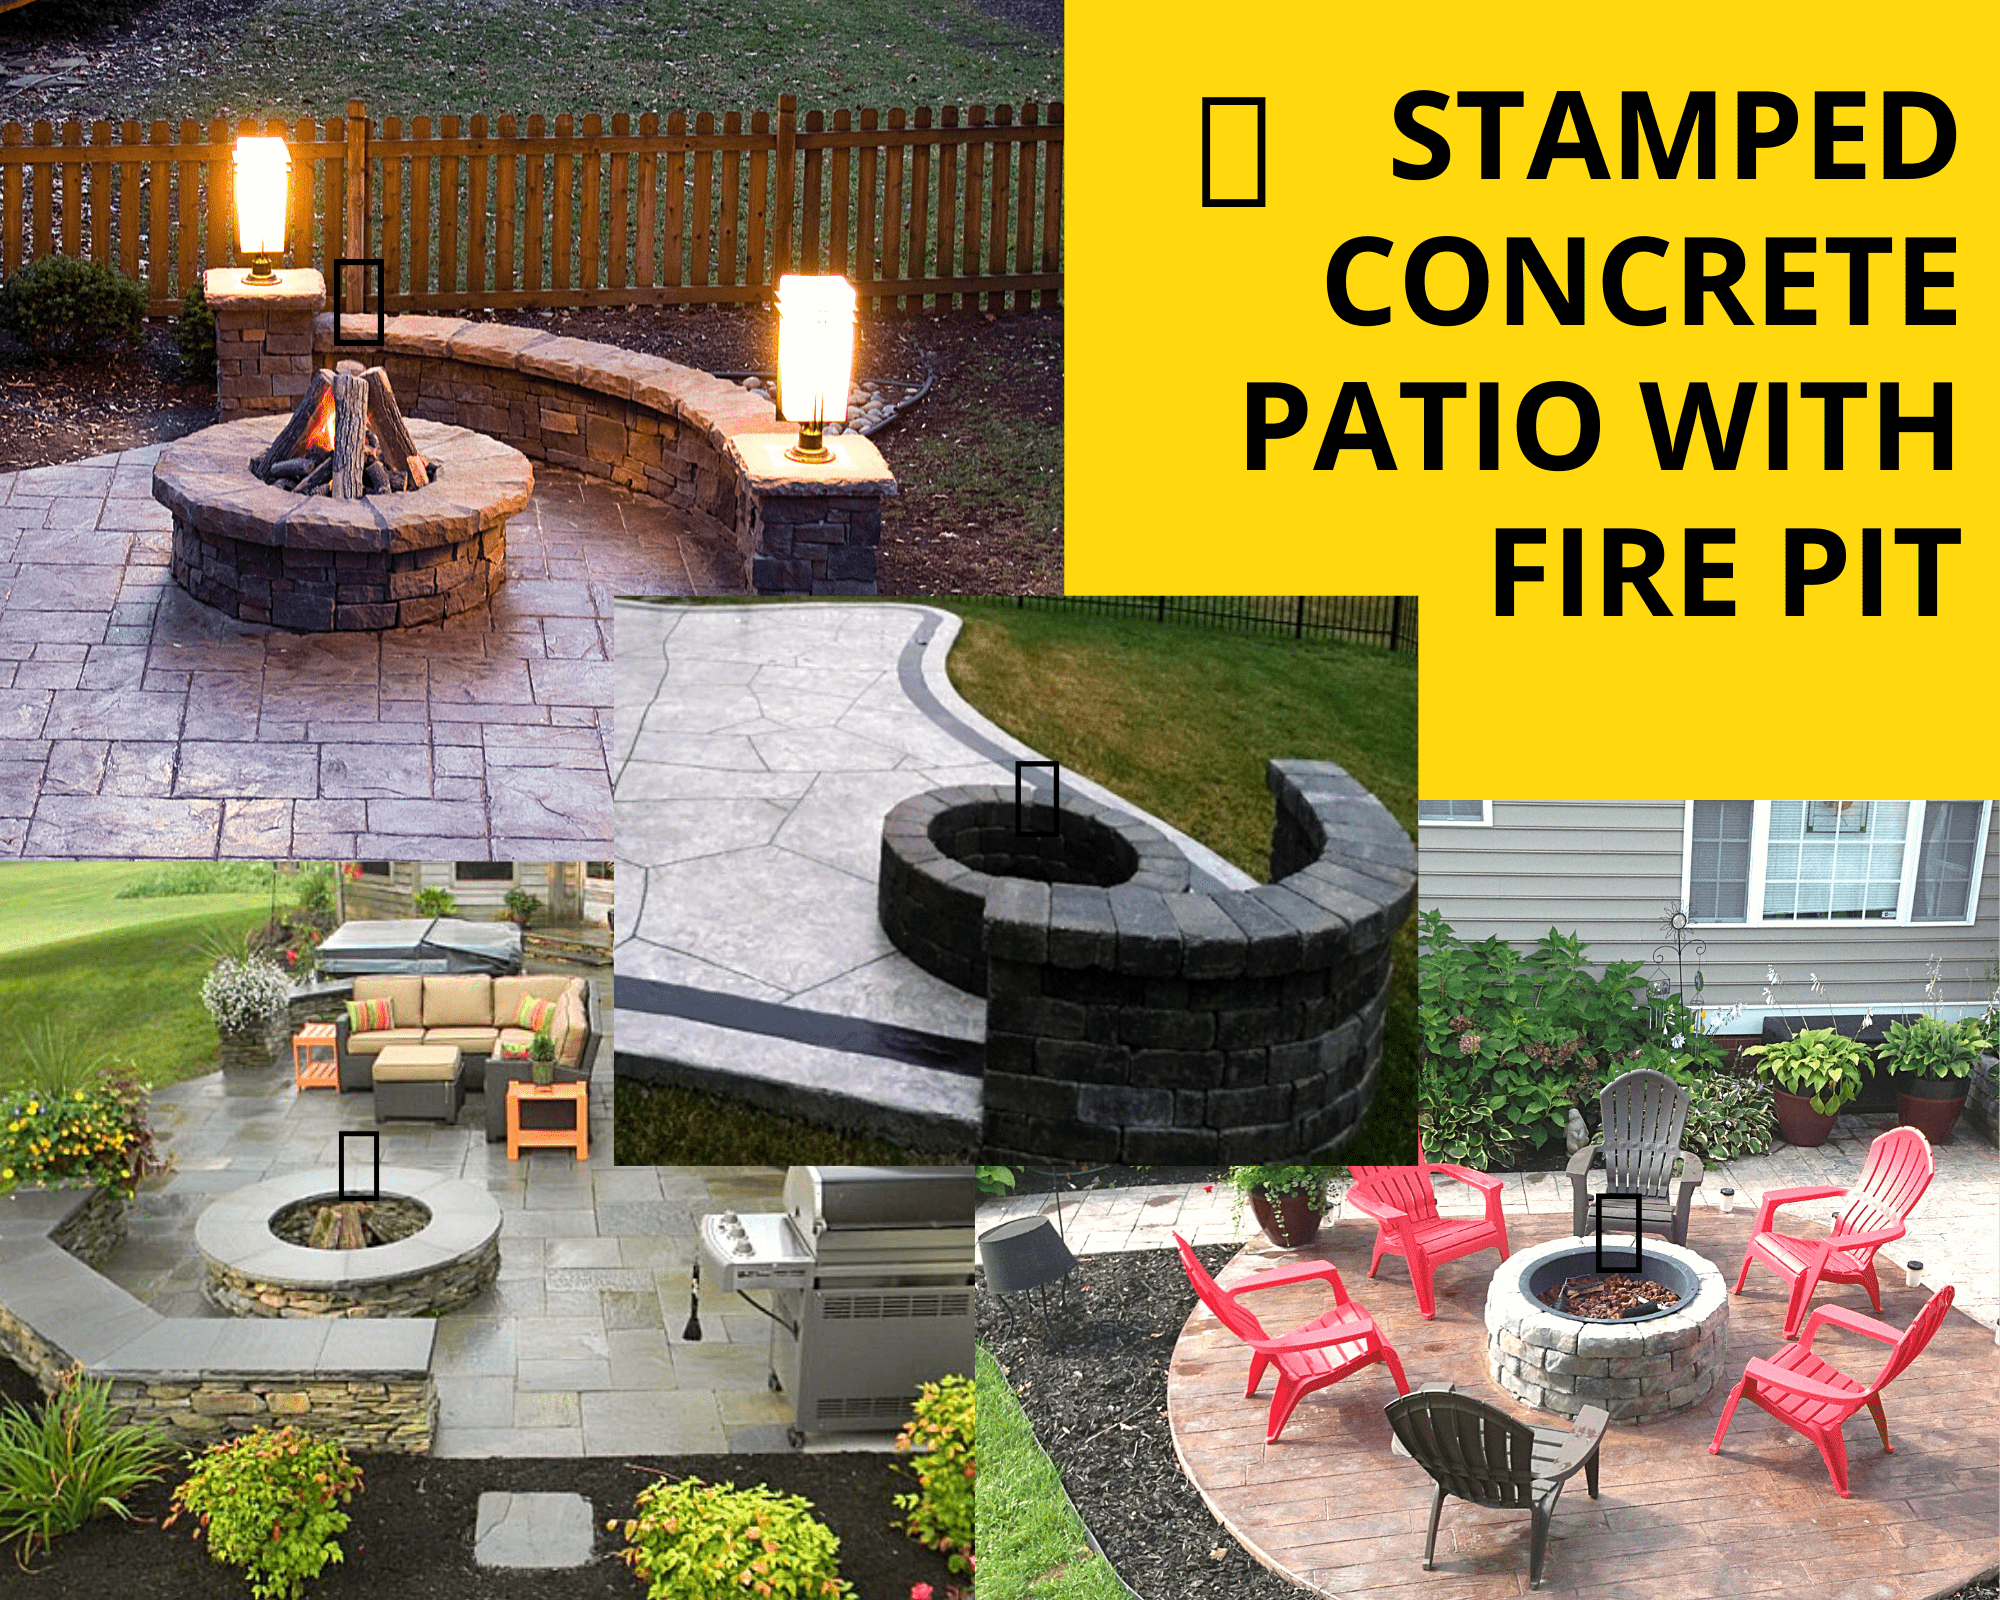 Stamped Concrete Patio With Fire Pit, Concrete Patio With Fire Pit